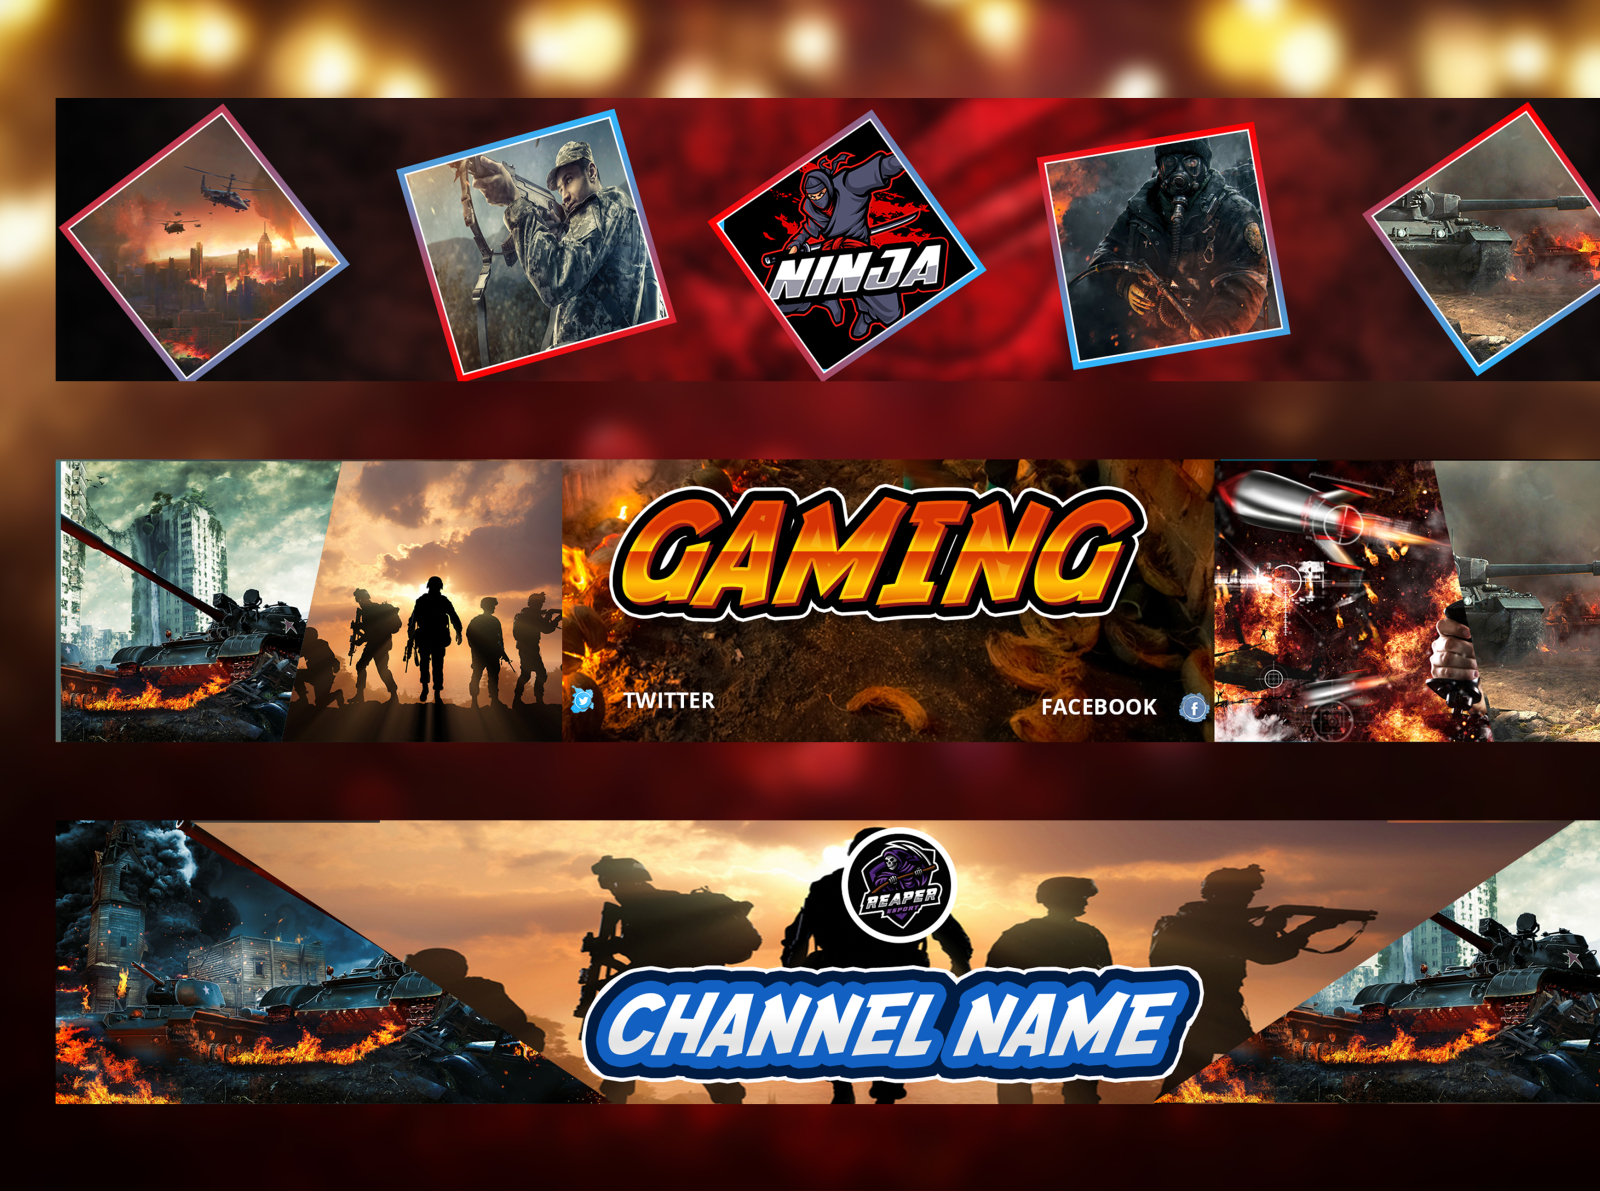 Creative And Unique Gaming YouTube Banner by Hosnain Ahmed on Dribbble